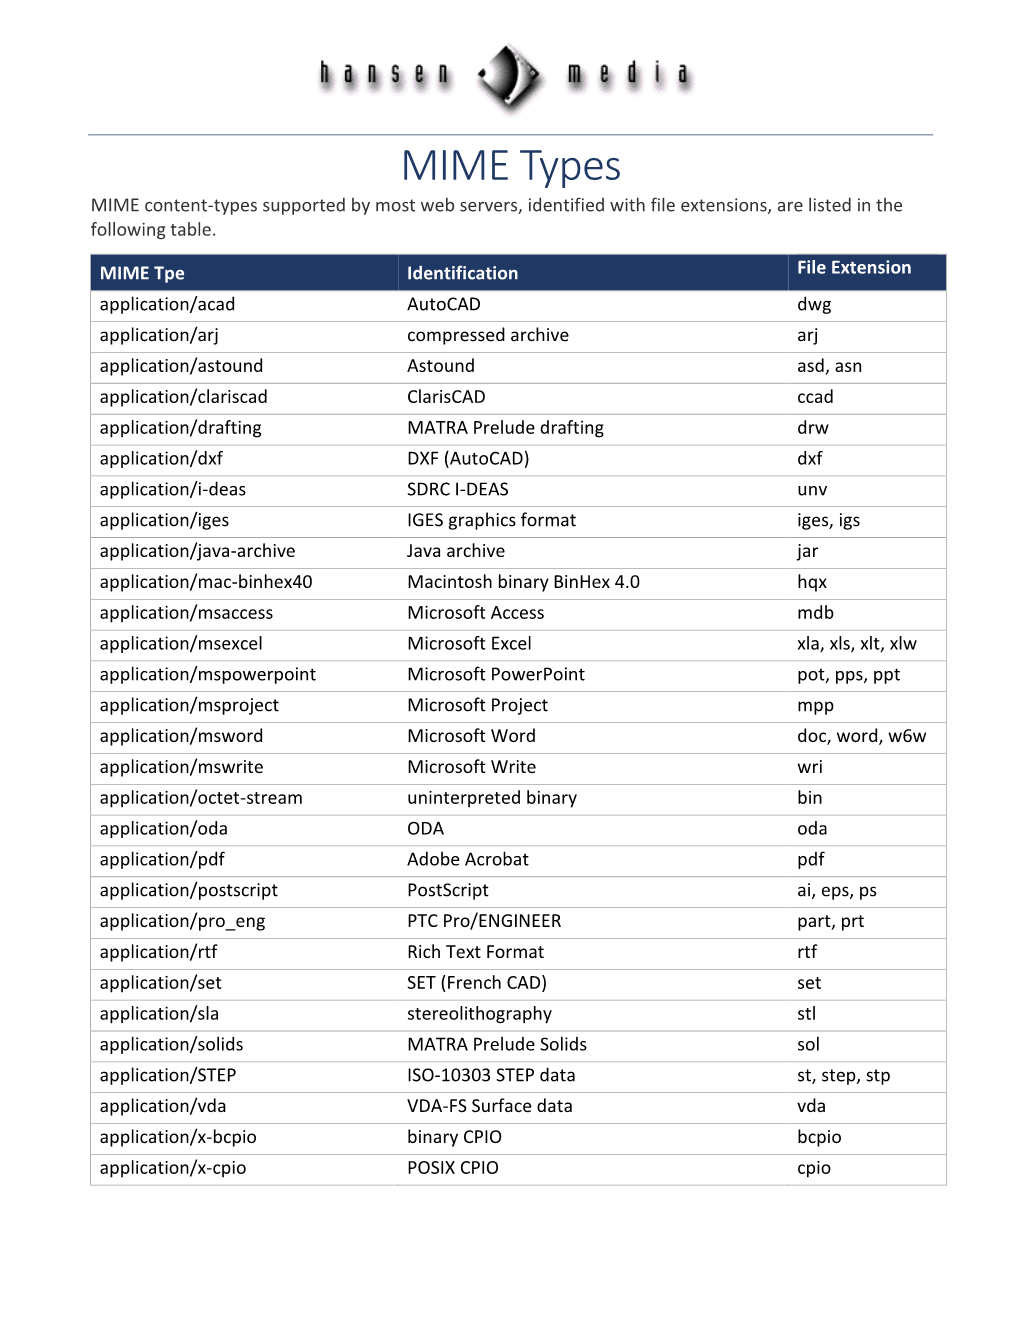 MIME Types MIME Content-Types Supported by Most Web Servers, Identified with File Extensions, Are Listed in the Following Table